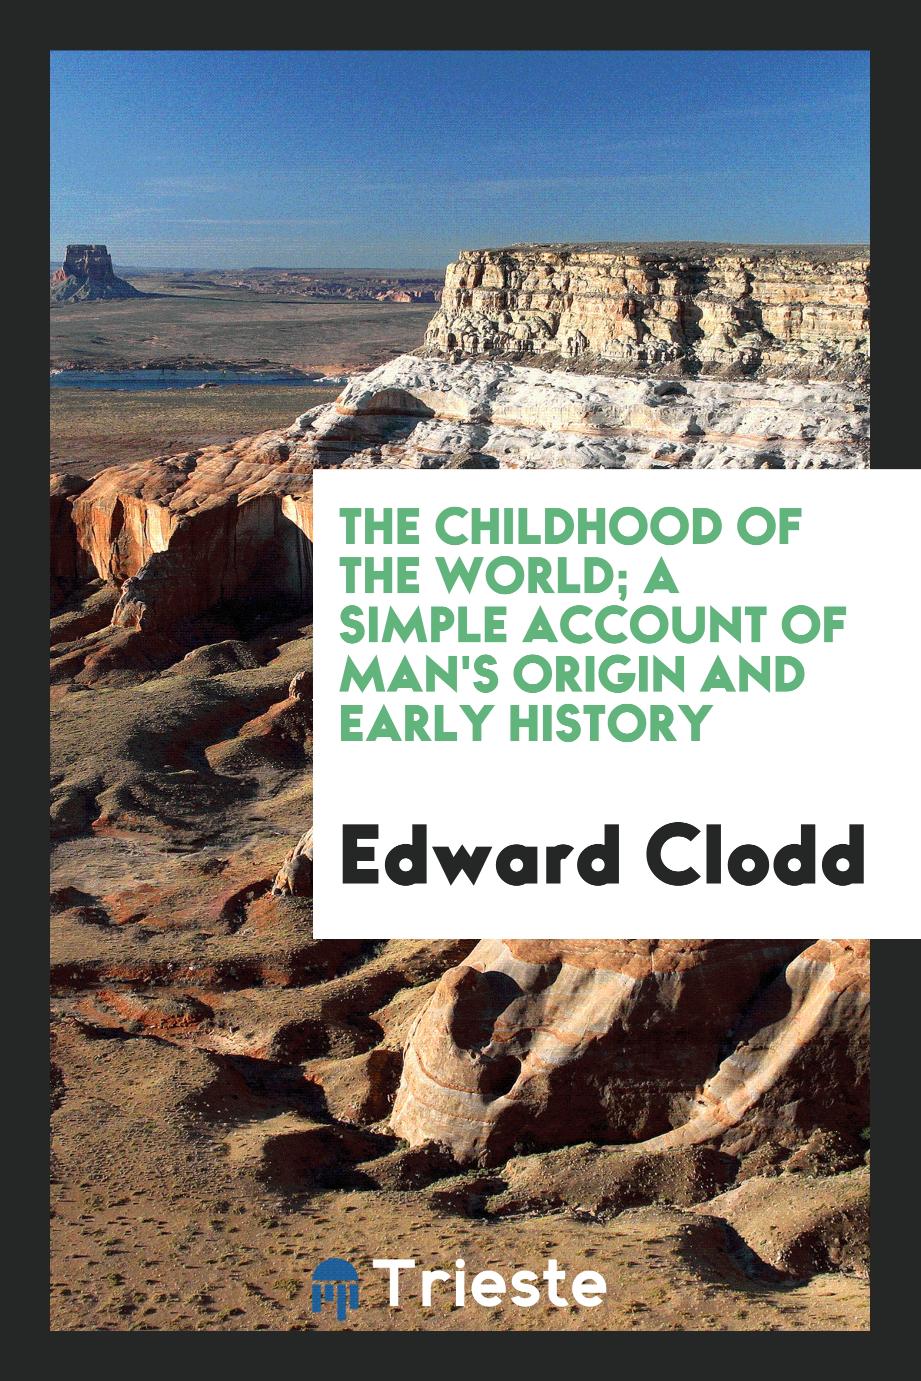 Edward Clodd - The childhood of the world; a simple account of man's origin and early history